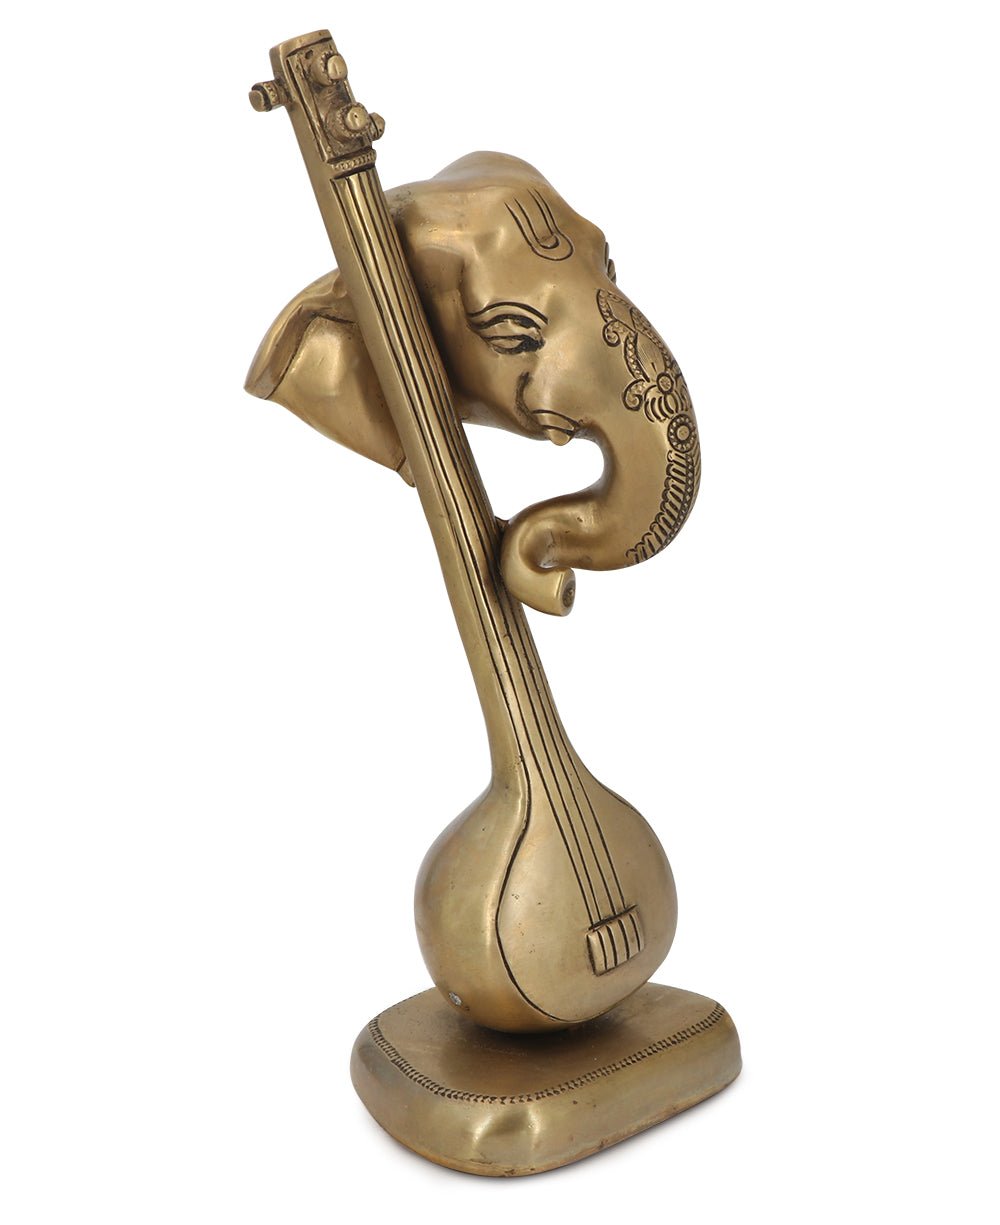 Artistic Abstract Brass Ganesh Statue Playing Sitar - Sculptures & Statues